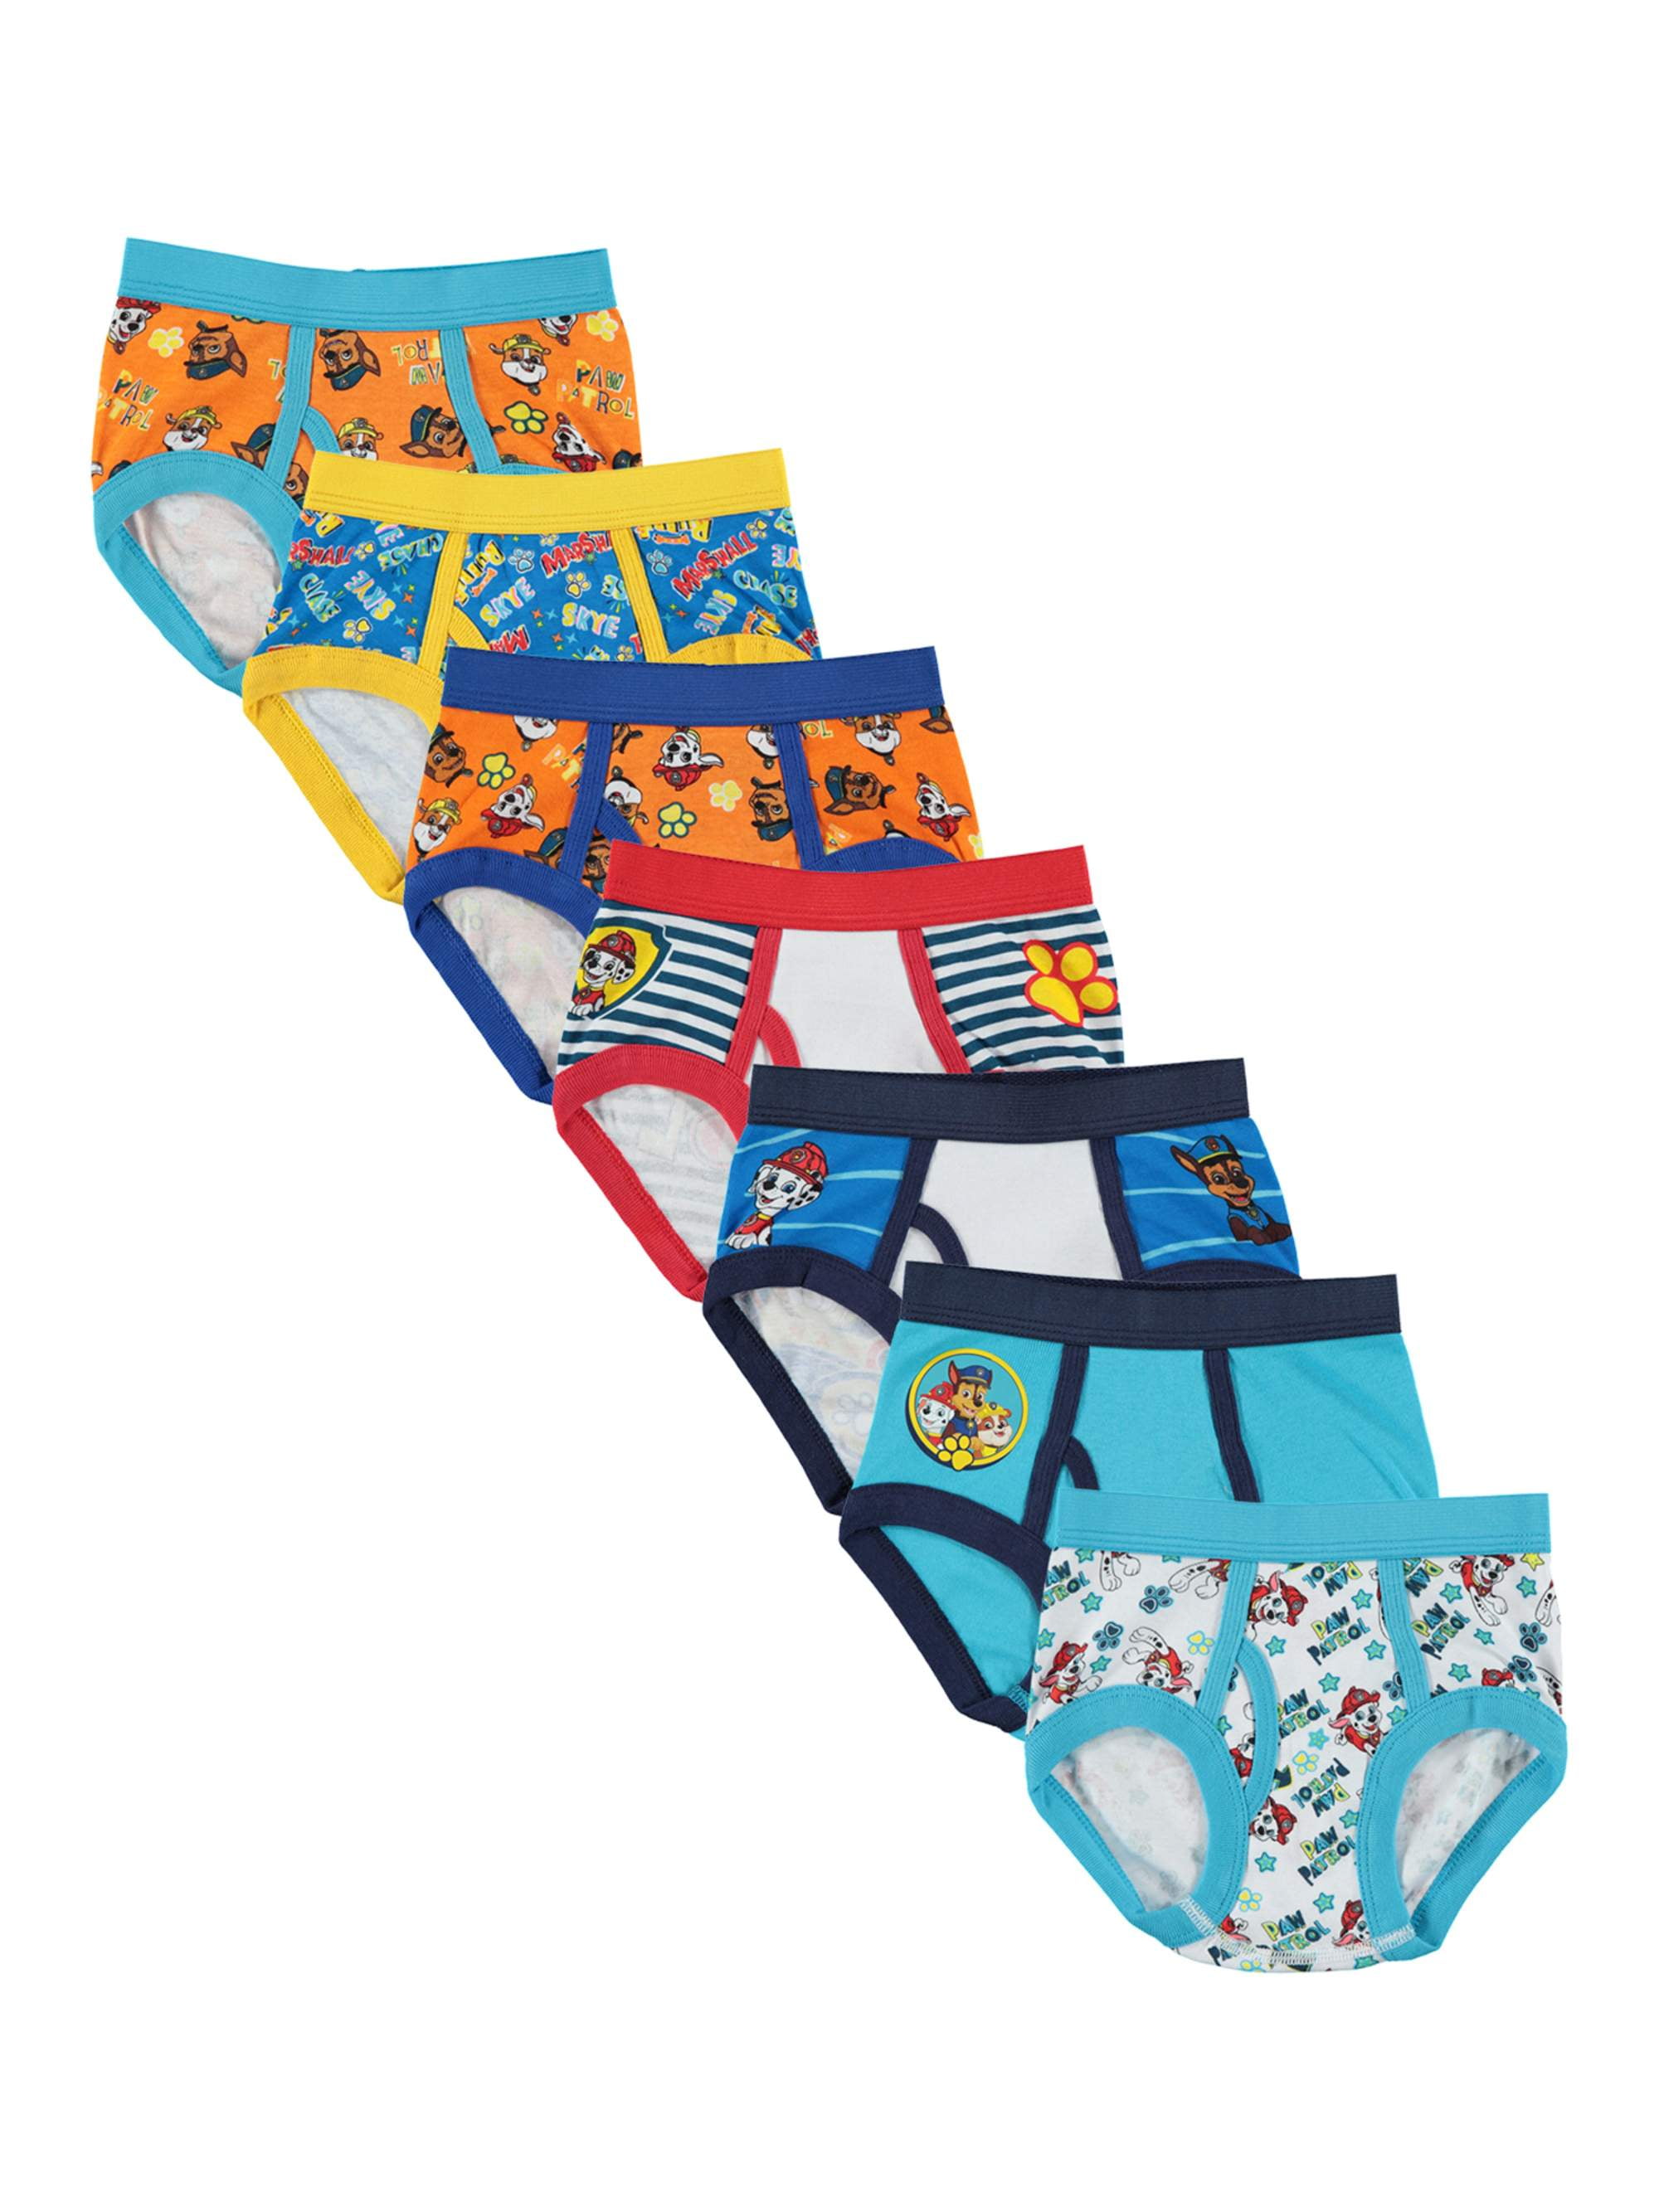 Paw Patrol Toddler Boy Briefs - 7 Pack (Sizes 3T-4T) Malaysia